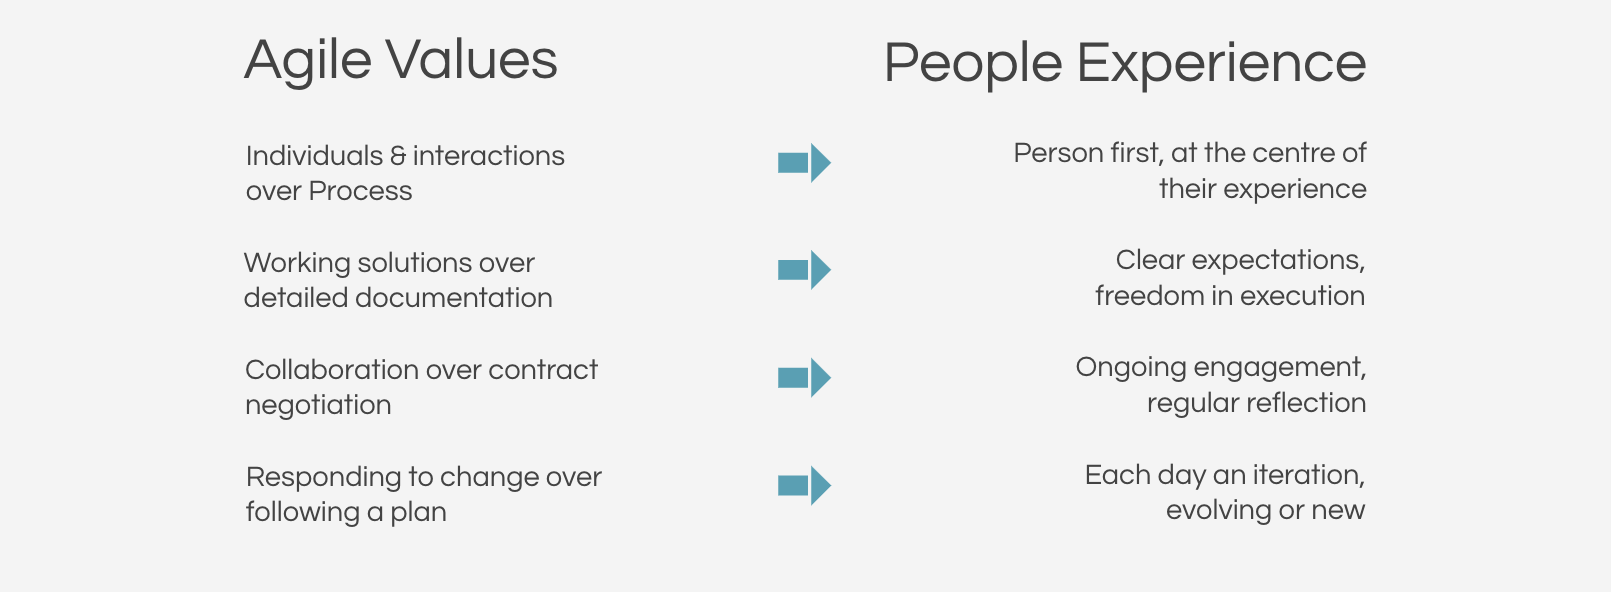 Agile values and people experiences 